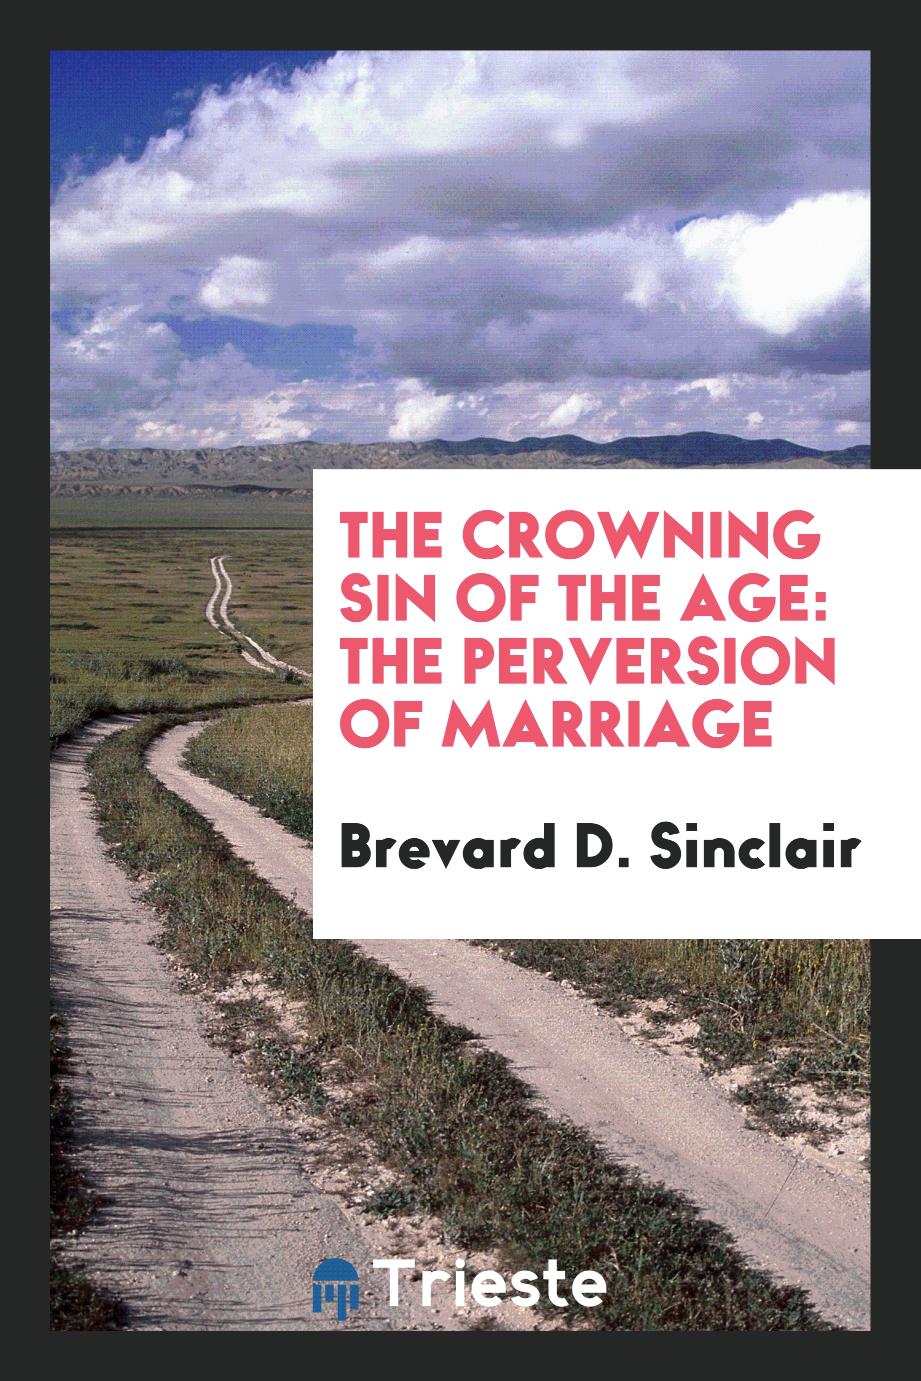 The Crowning Sin of the Age: The Perversion of Marriage